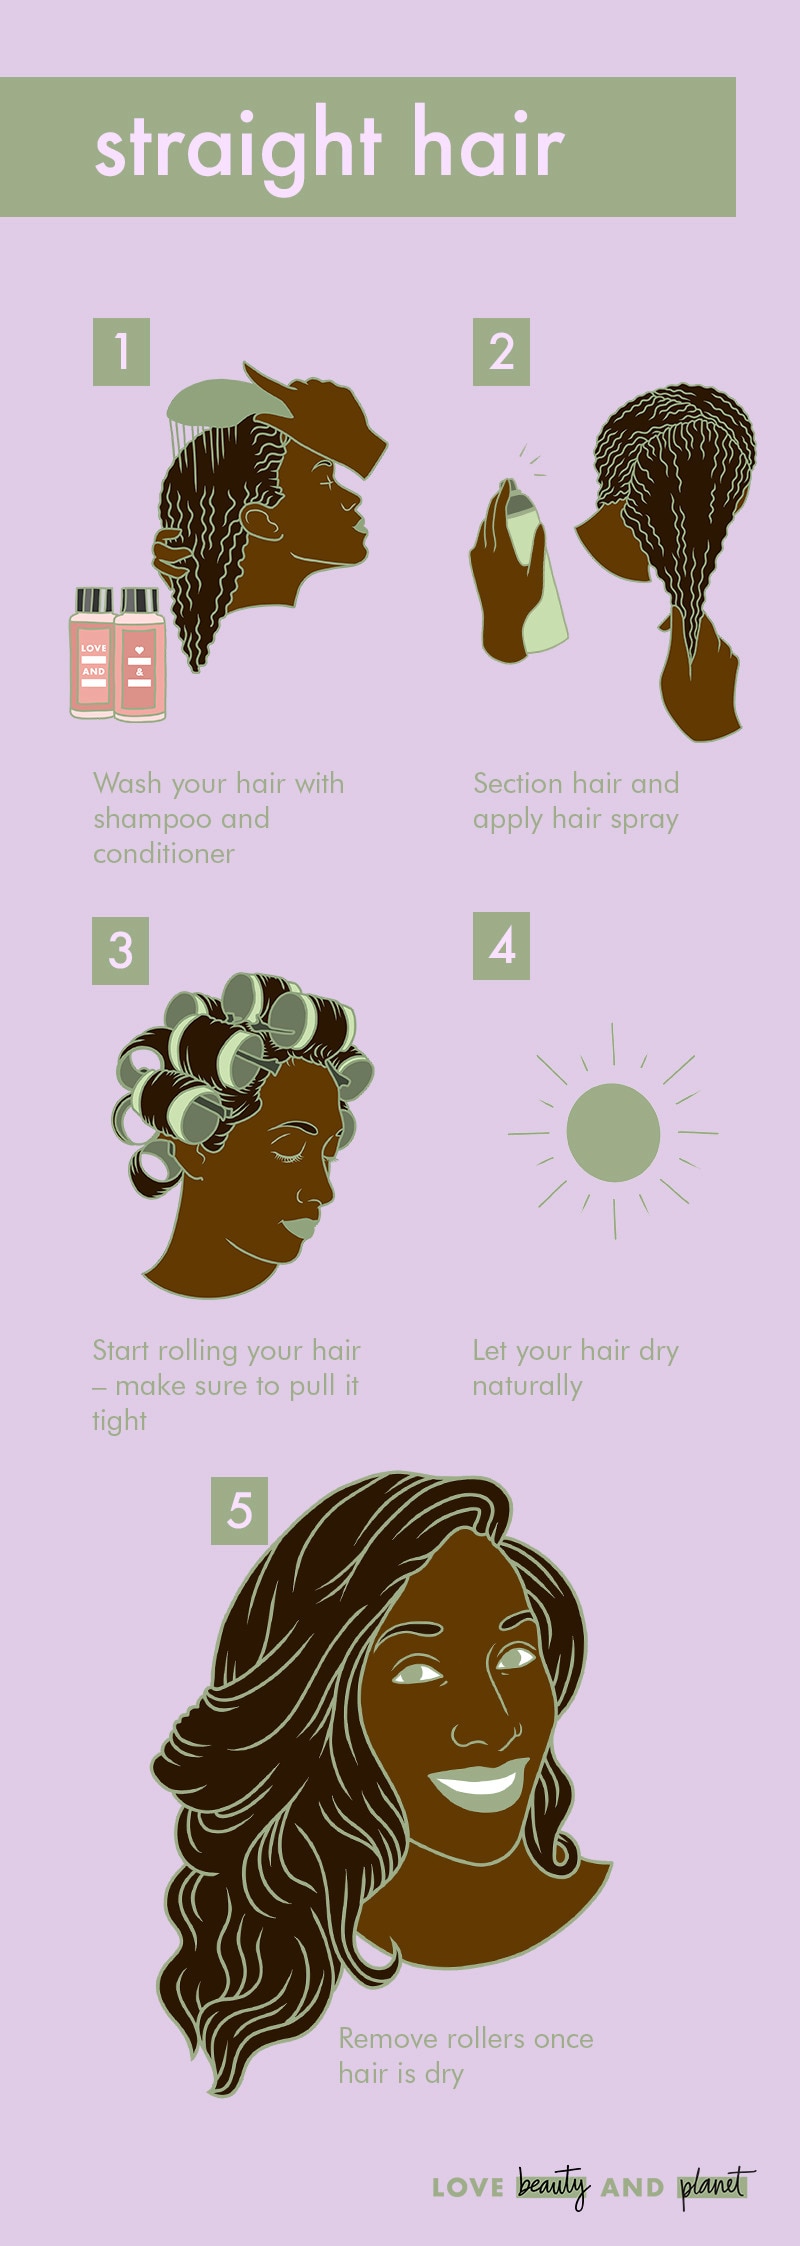 heatless straight hairstyle step-by-step illustration